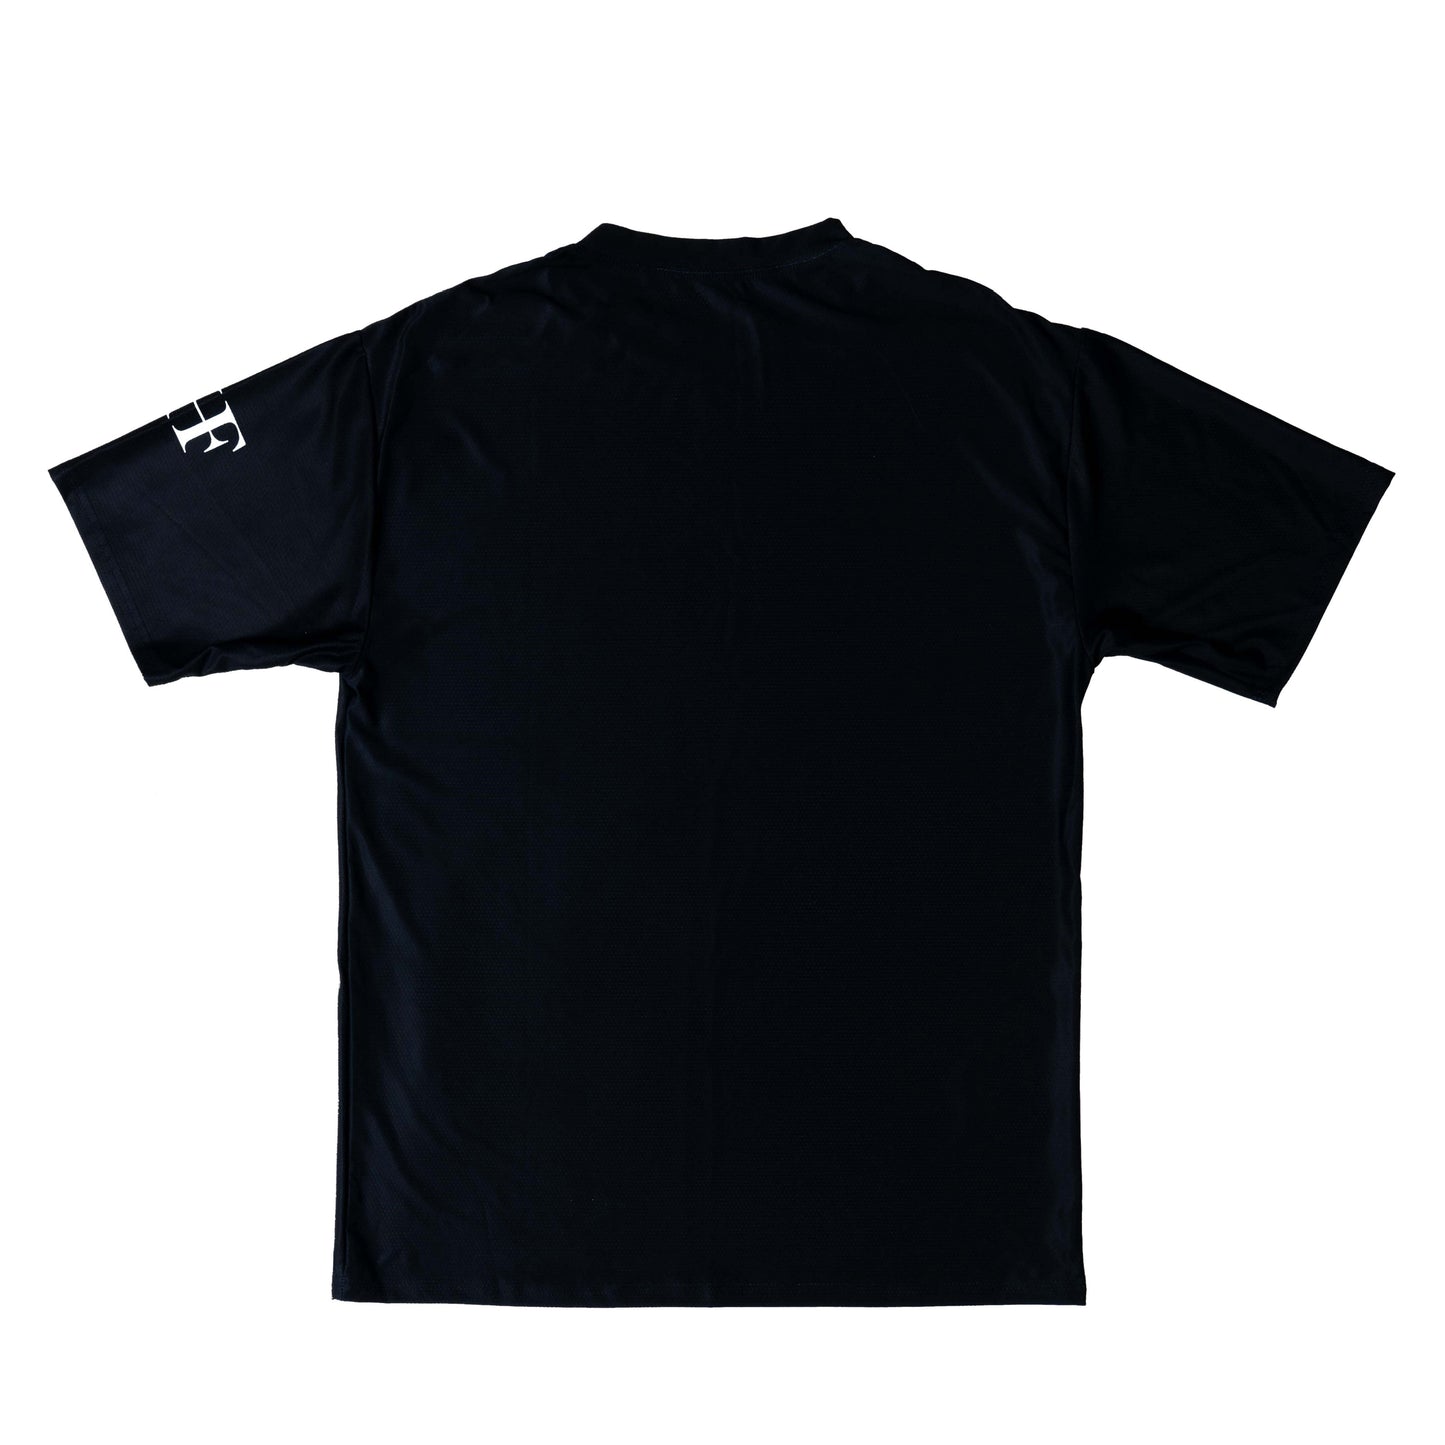 FREQ 06: Intuition  - Men's Activewear Short Sleeve